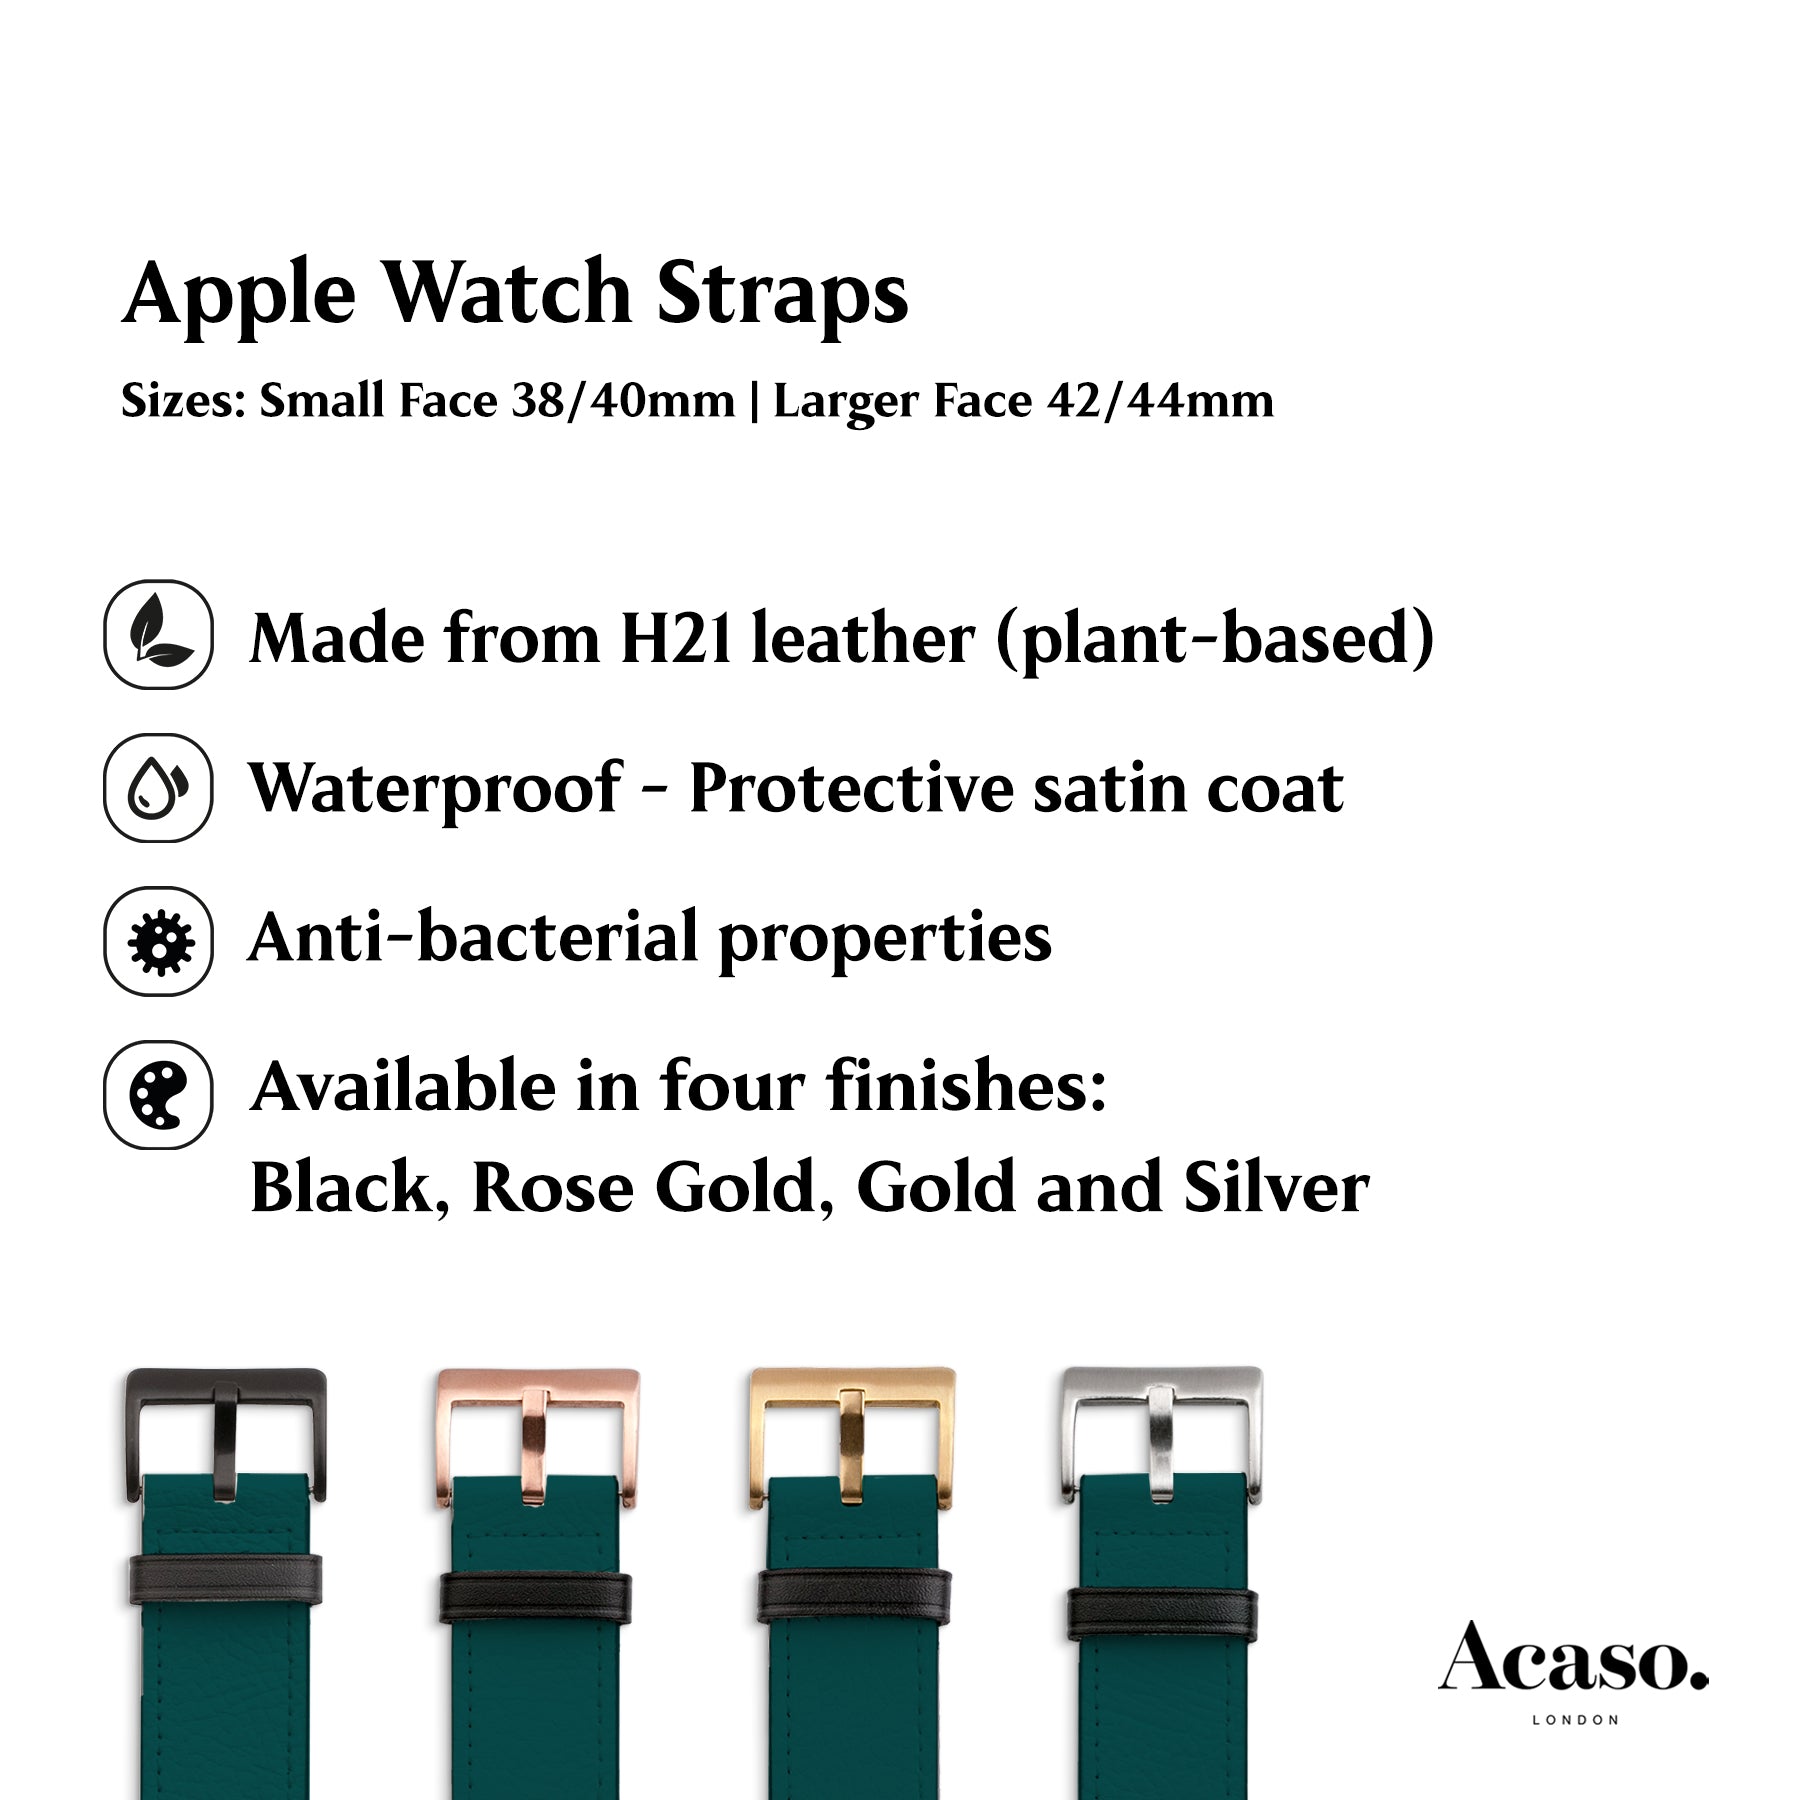 the apple watch straps are different colors and sizes